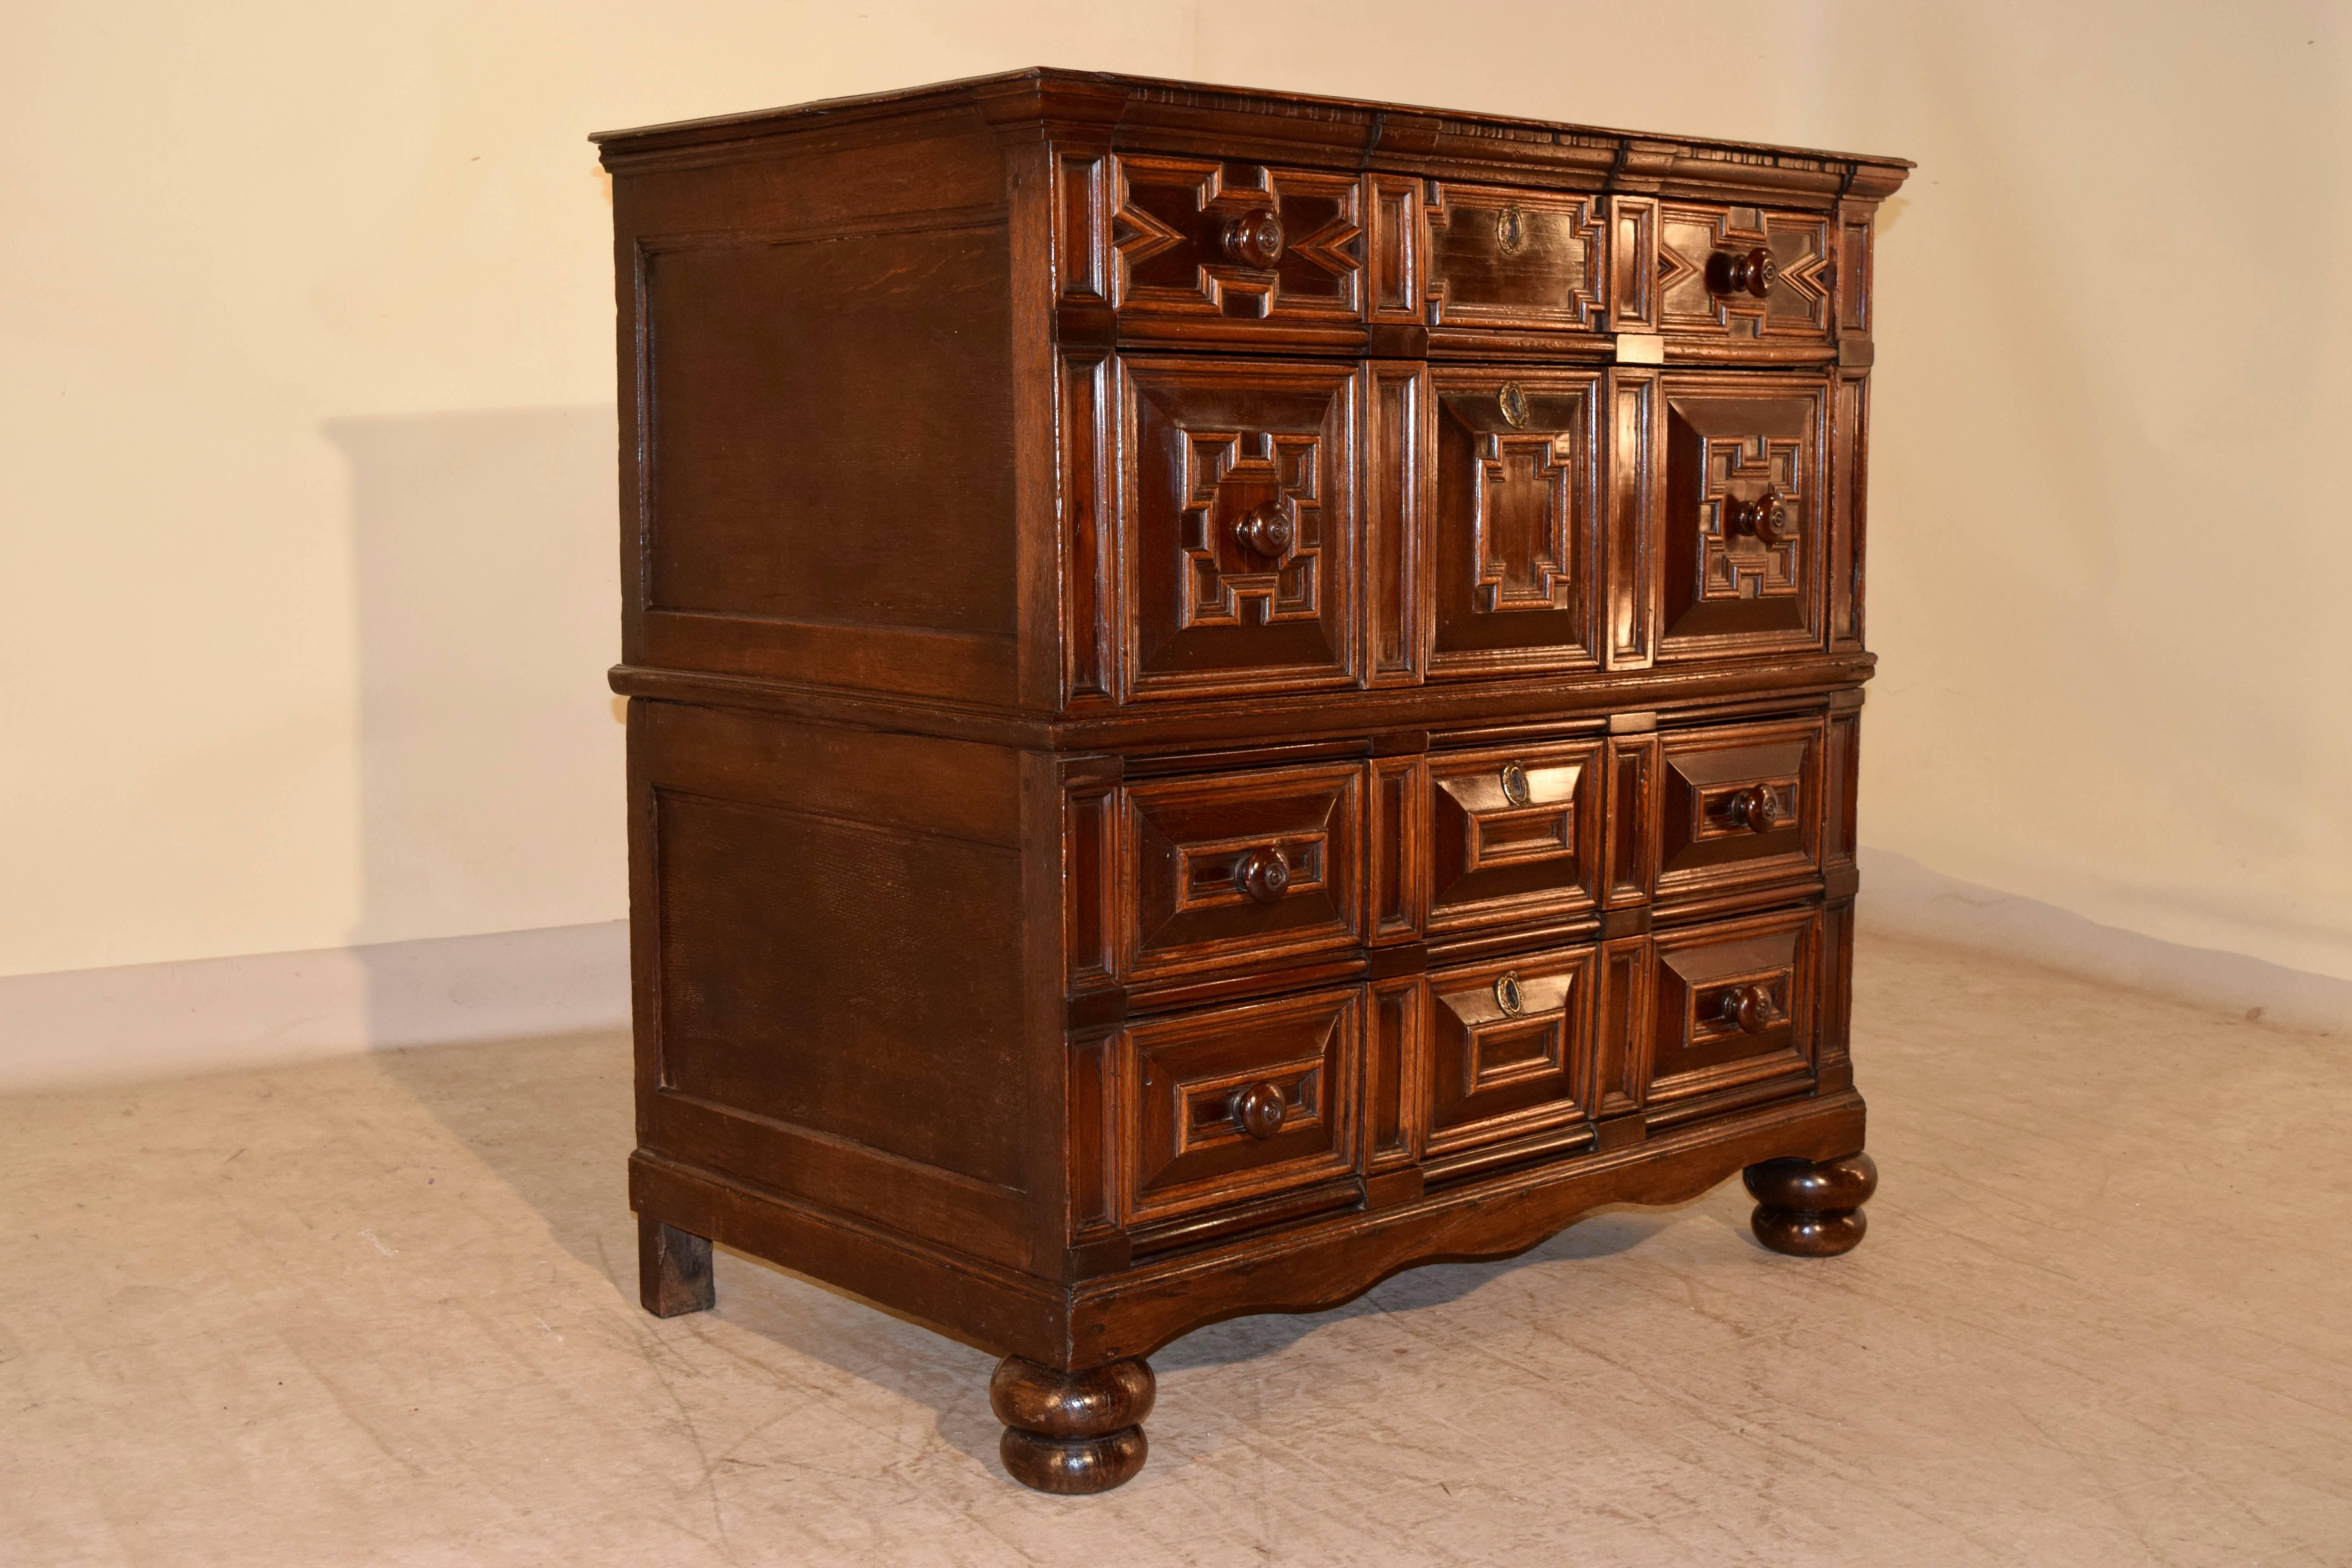 17th century unusual two-piece chest of drawers. The top is made up of oak planks, and has a beveled edge. There is old restoration, staining and discoloration on the top from honest use. There are four drawers, all with cushion panels and geometric